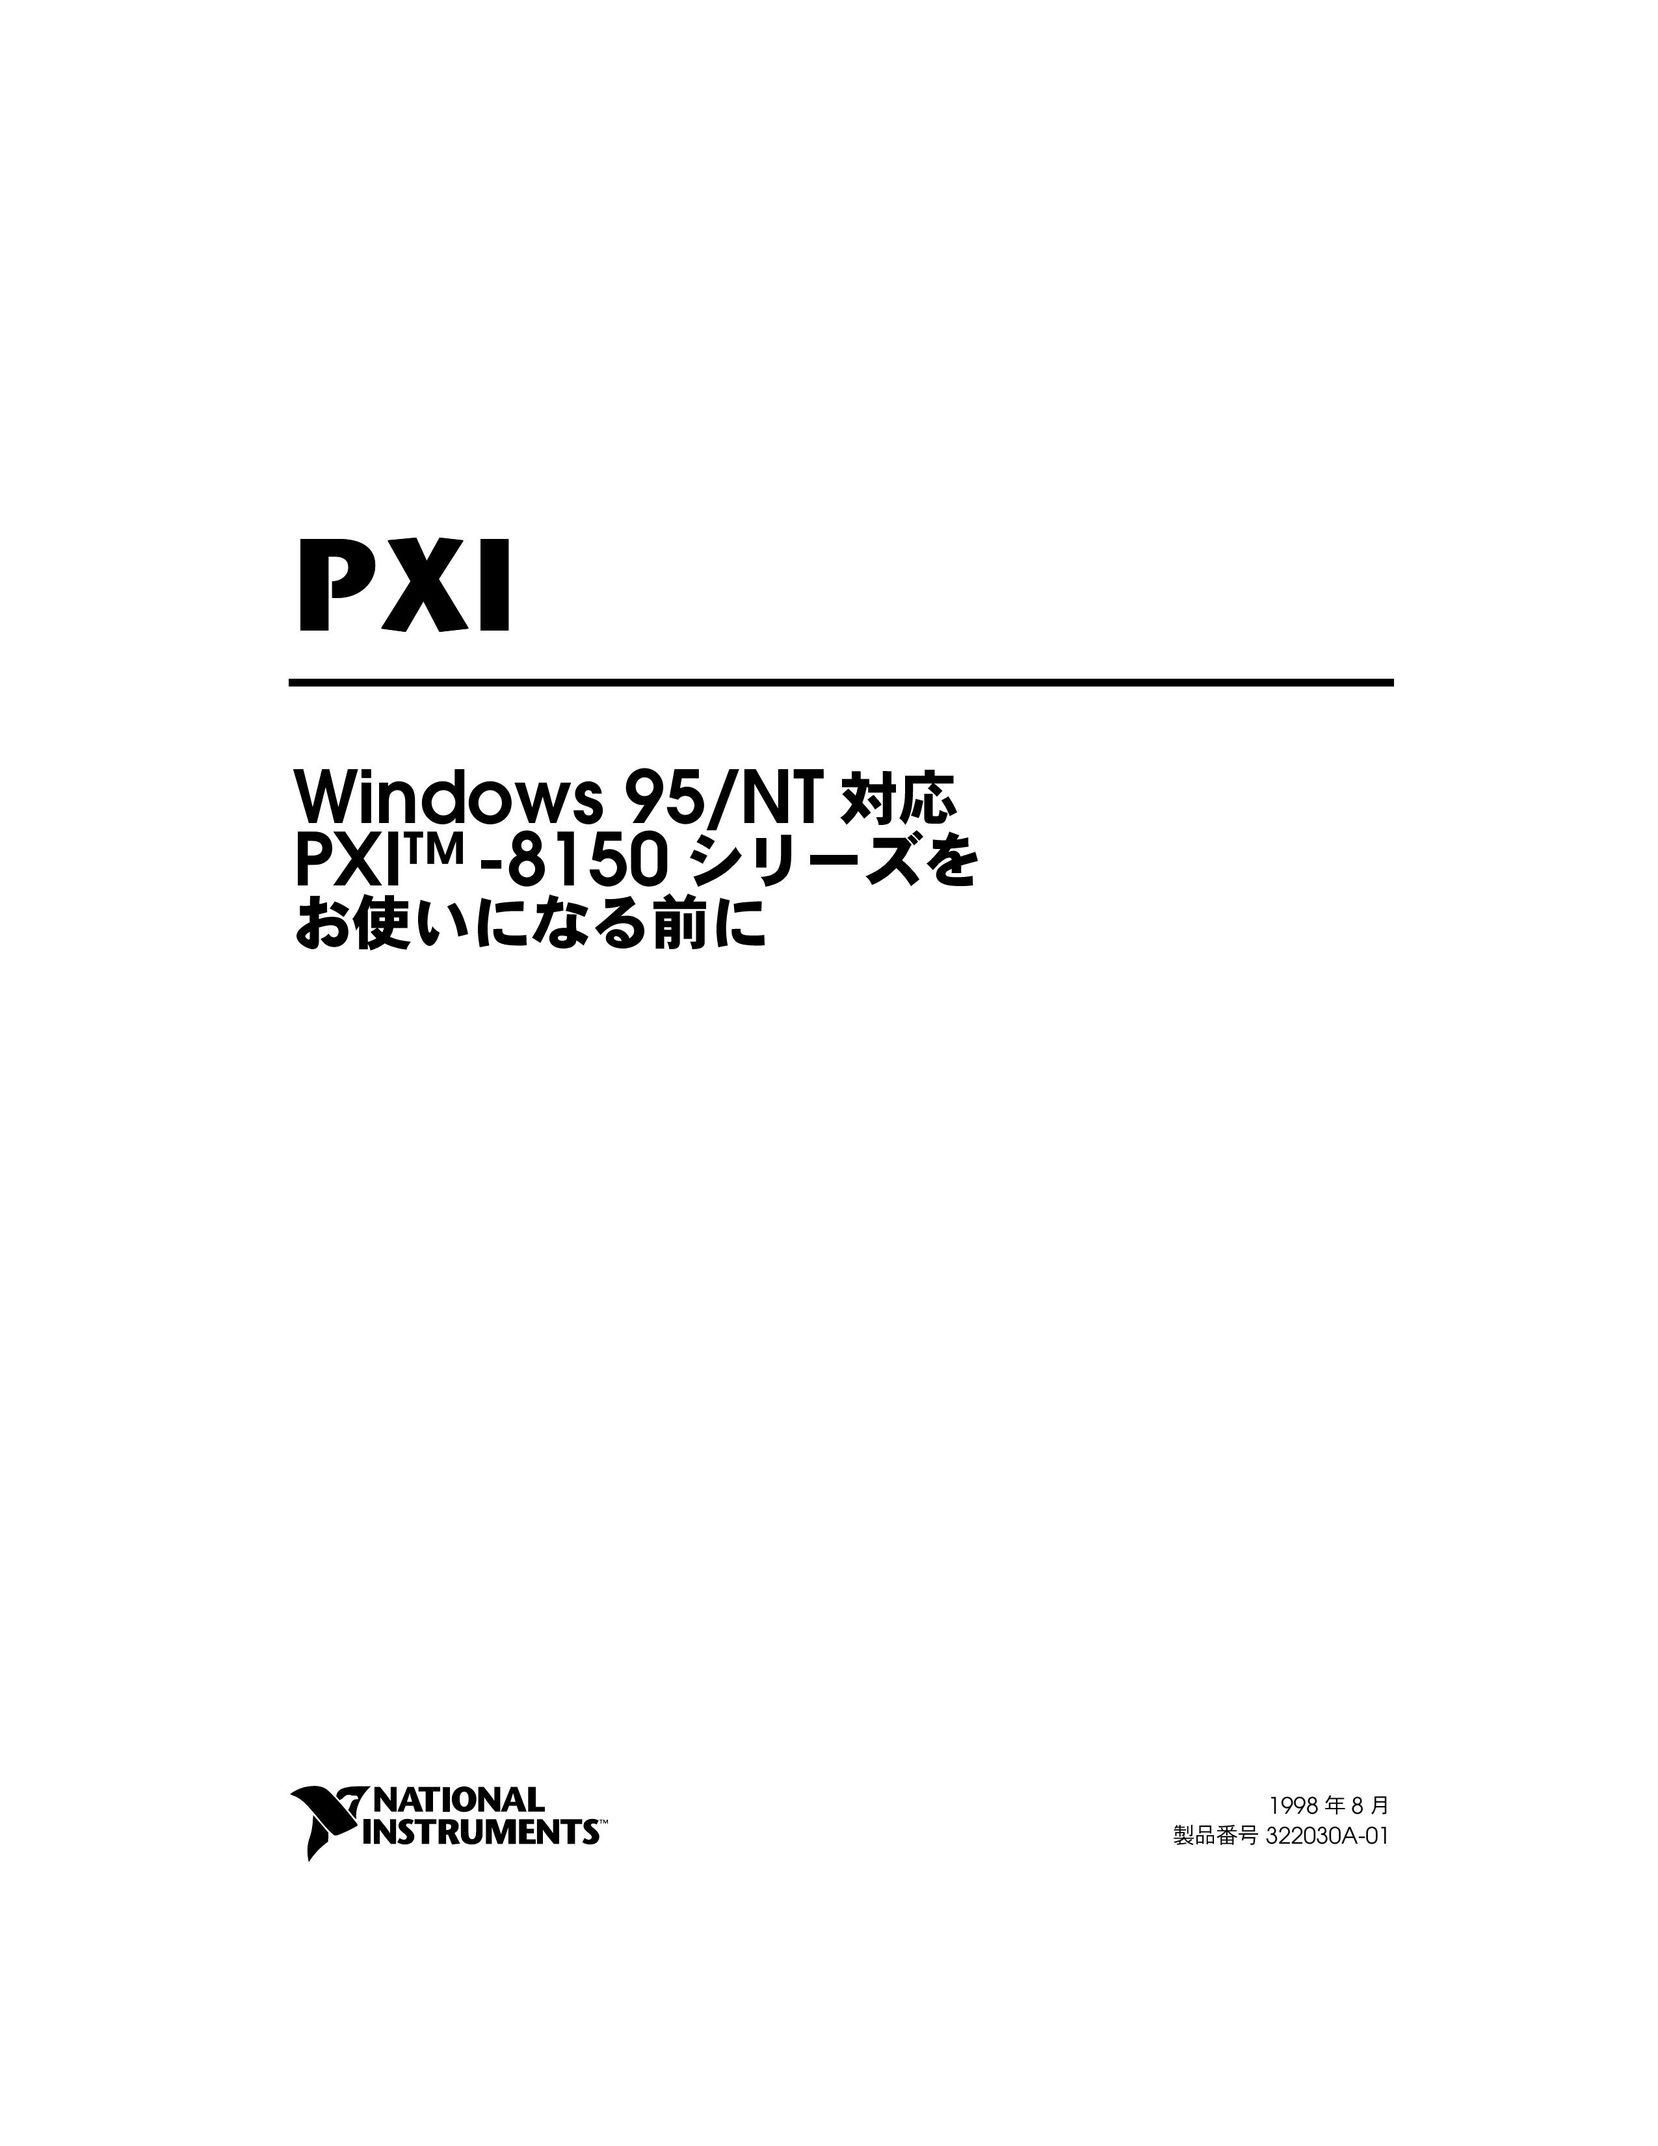 National Instruments PXI-8150 Computer Hardware User Manual